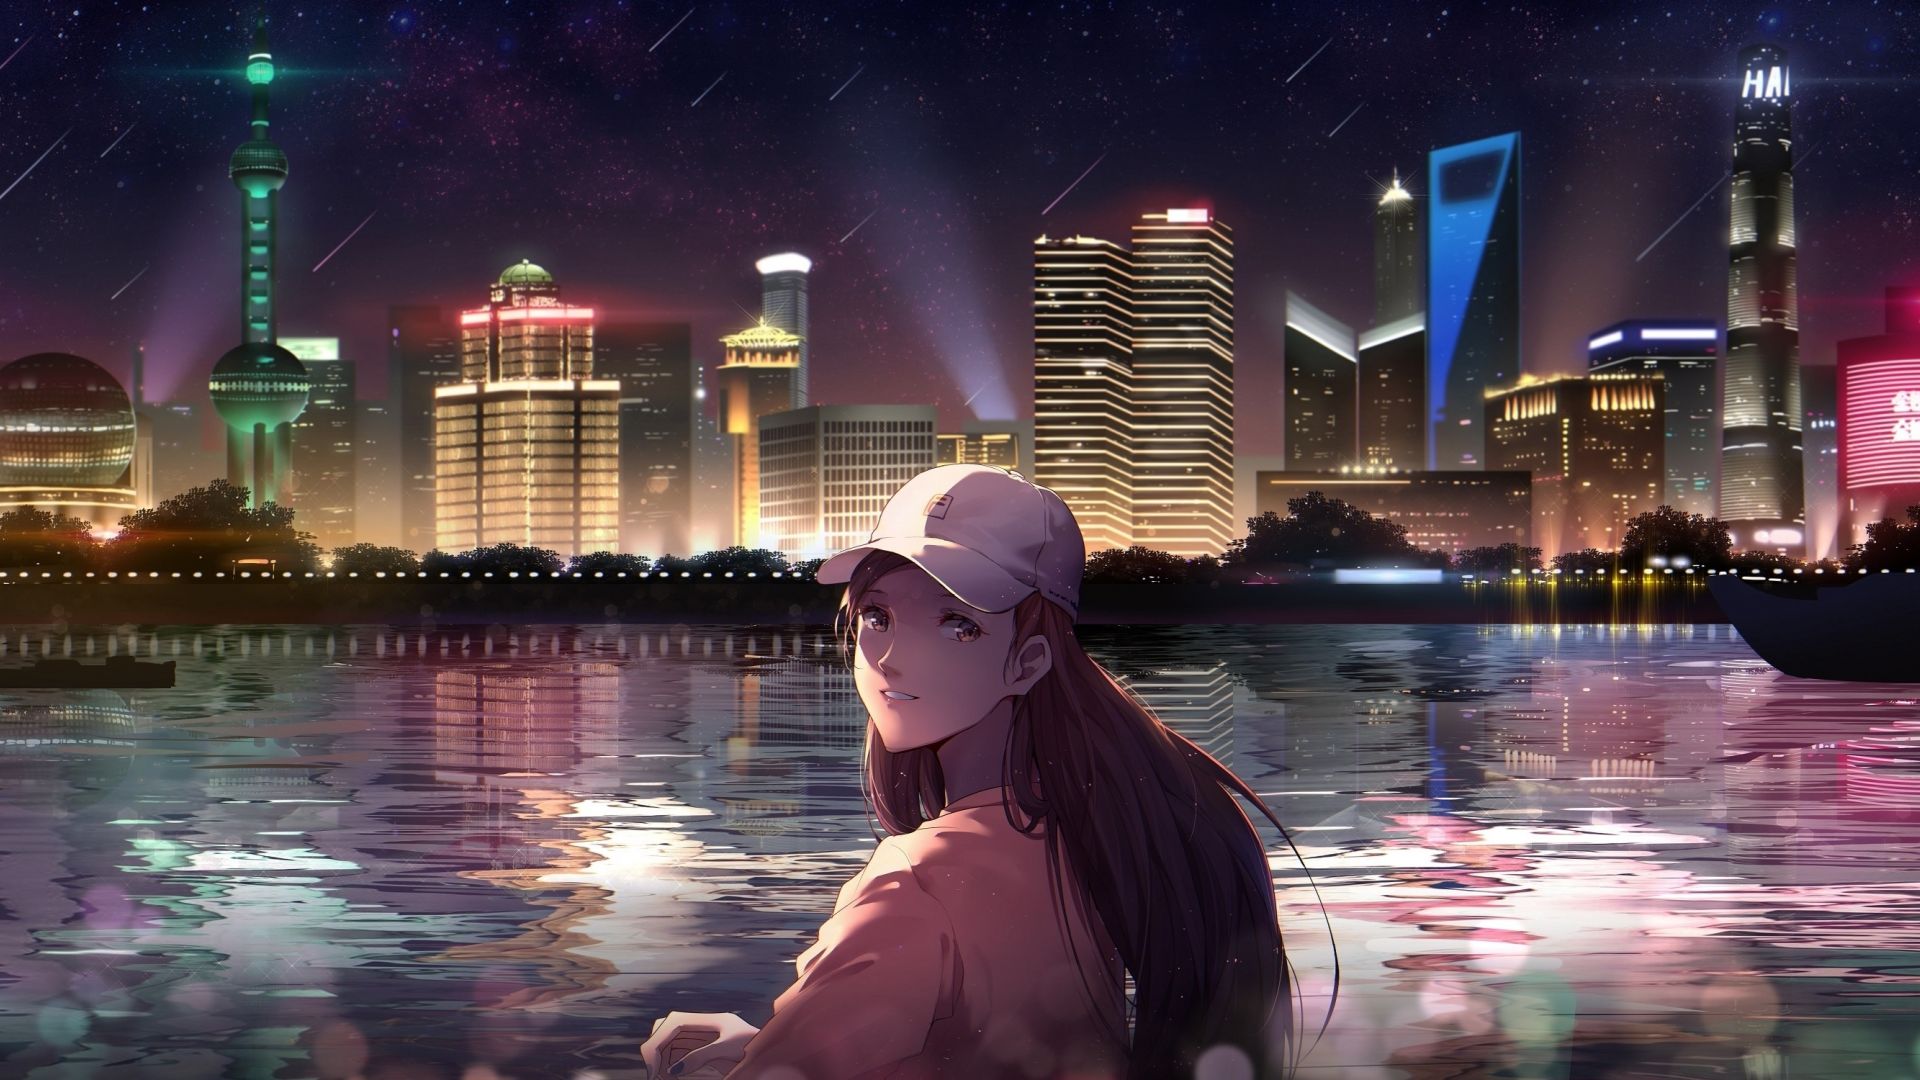 Desktop wallpaper night out, city, anime girl, original, HD image, picture, background, 4f7254